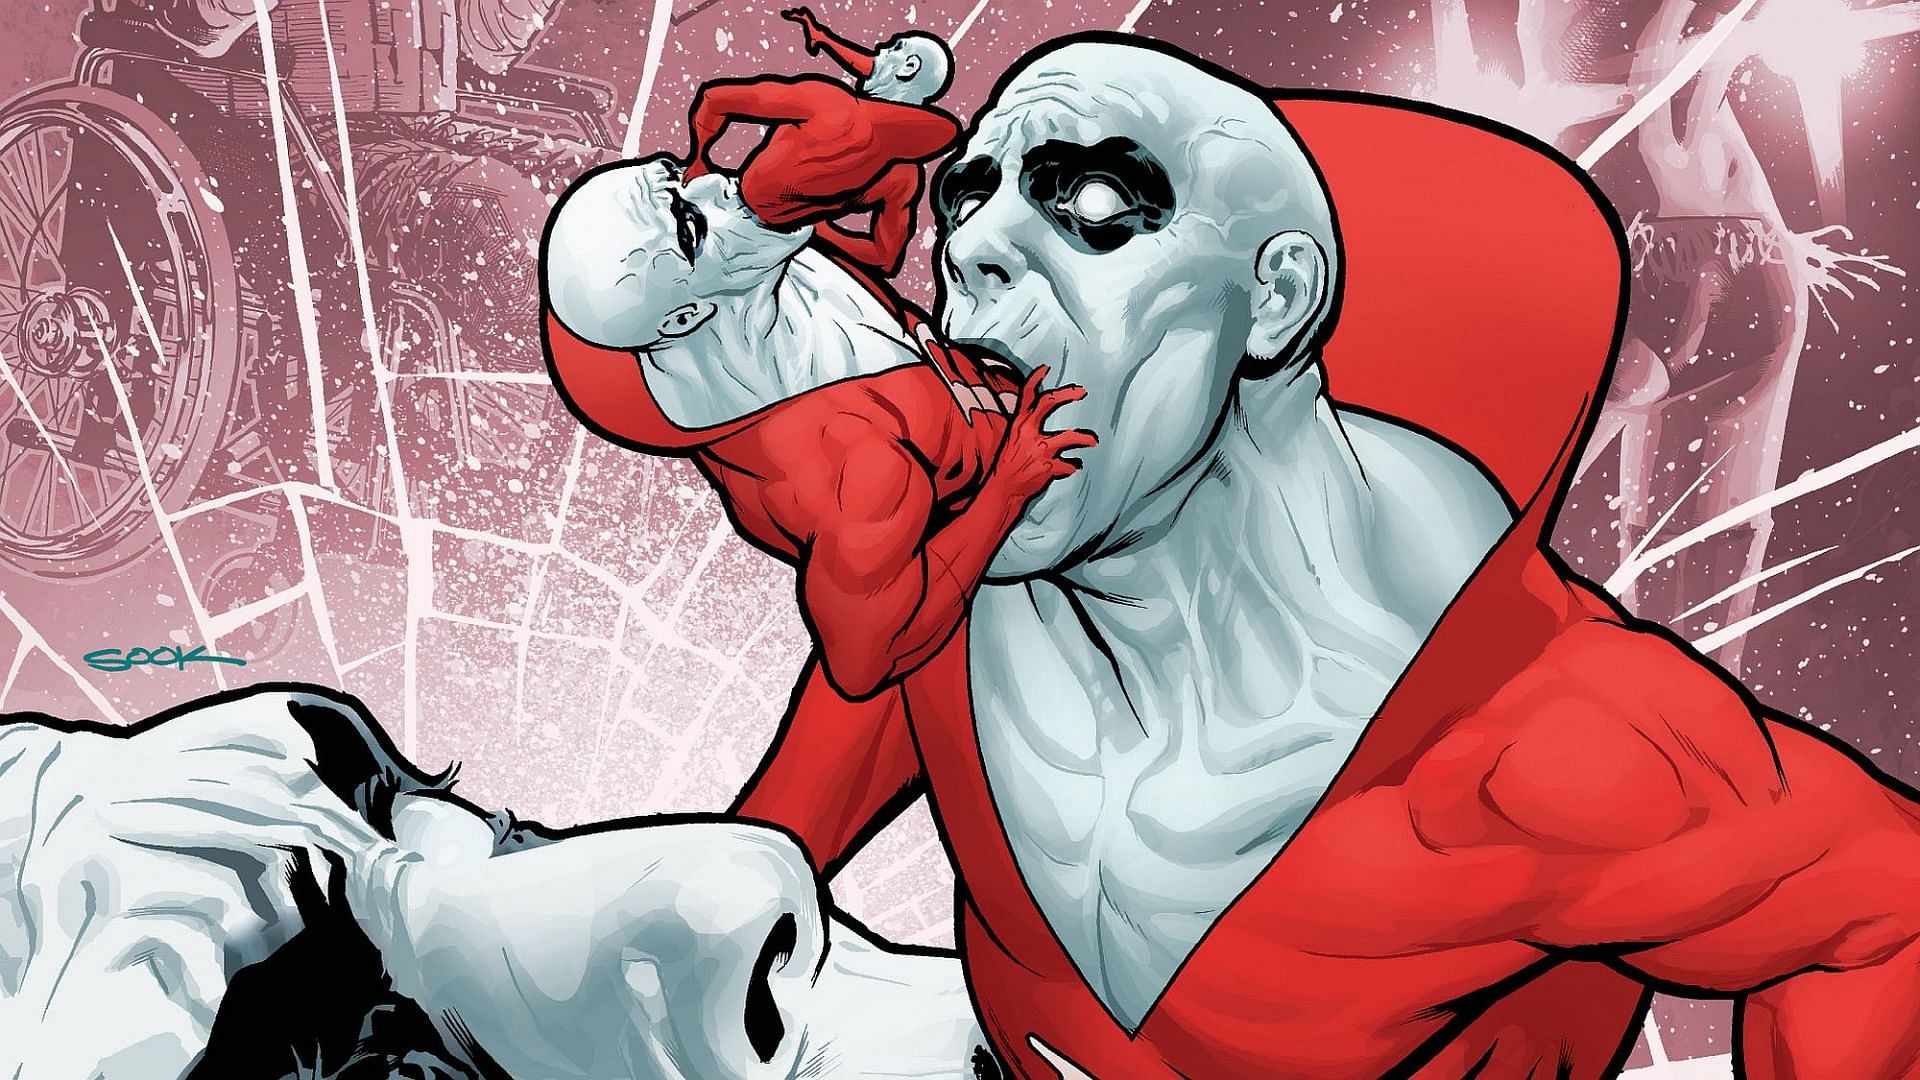 Boston Brand wears his circus attire even in the afterlife (Art by Ryan Sook)